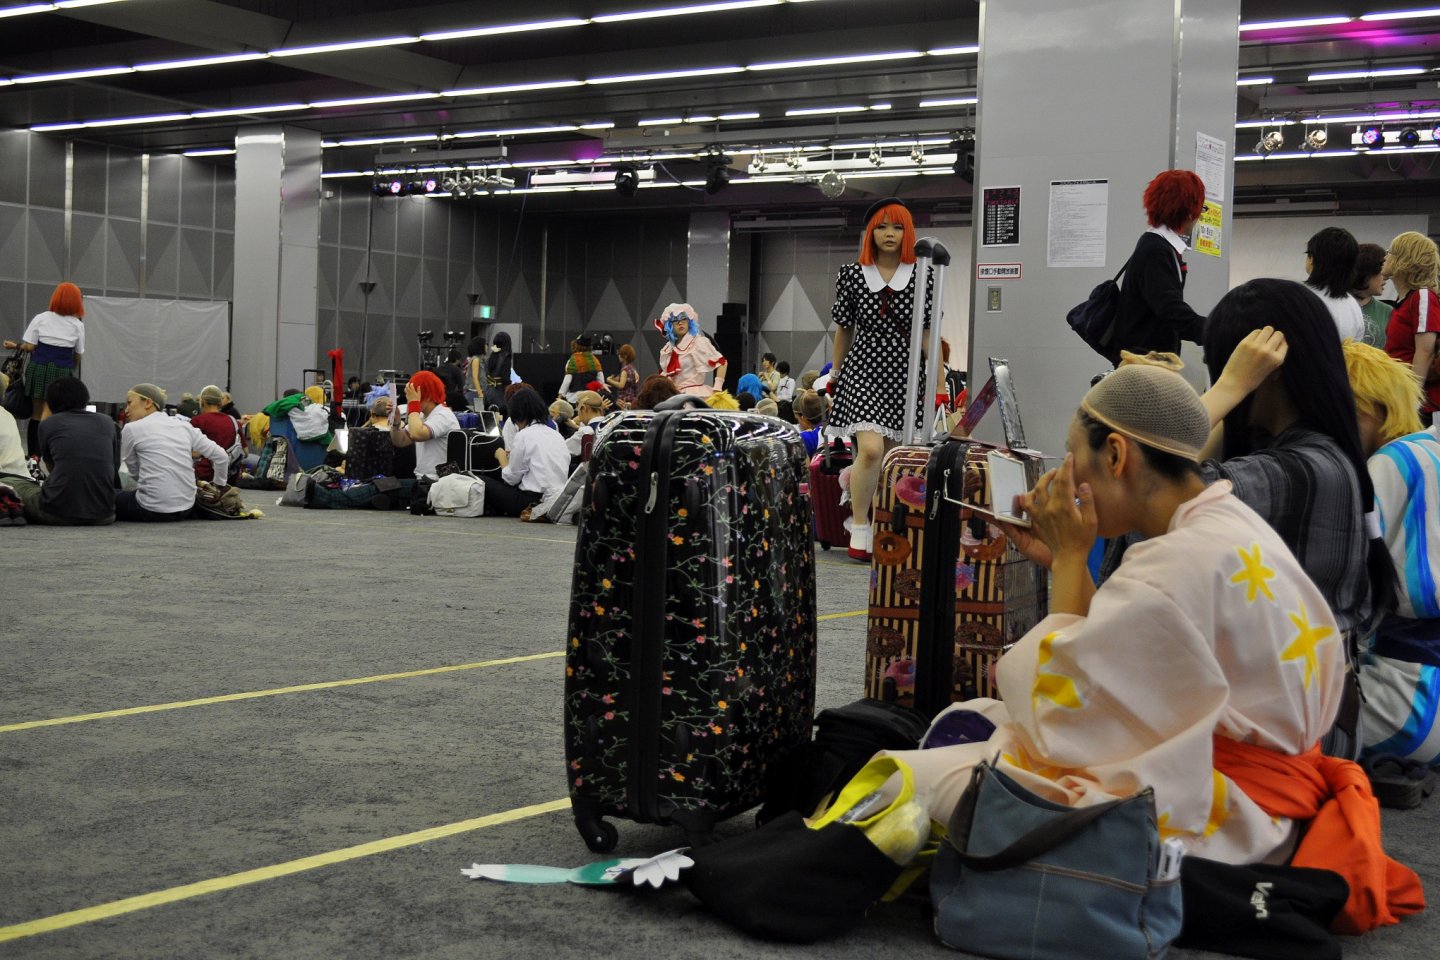 Behind the scenes, cosplayers get ready at Prism Hall before prancing around Tokyo Dome City